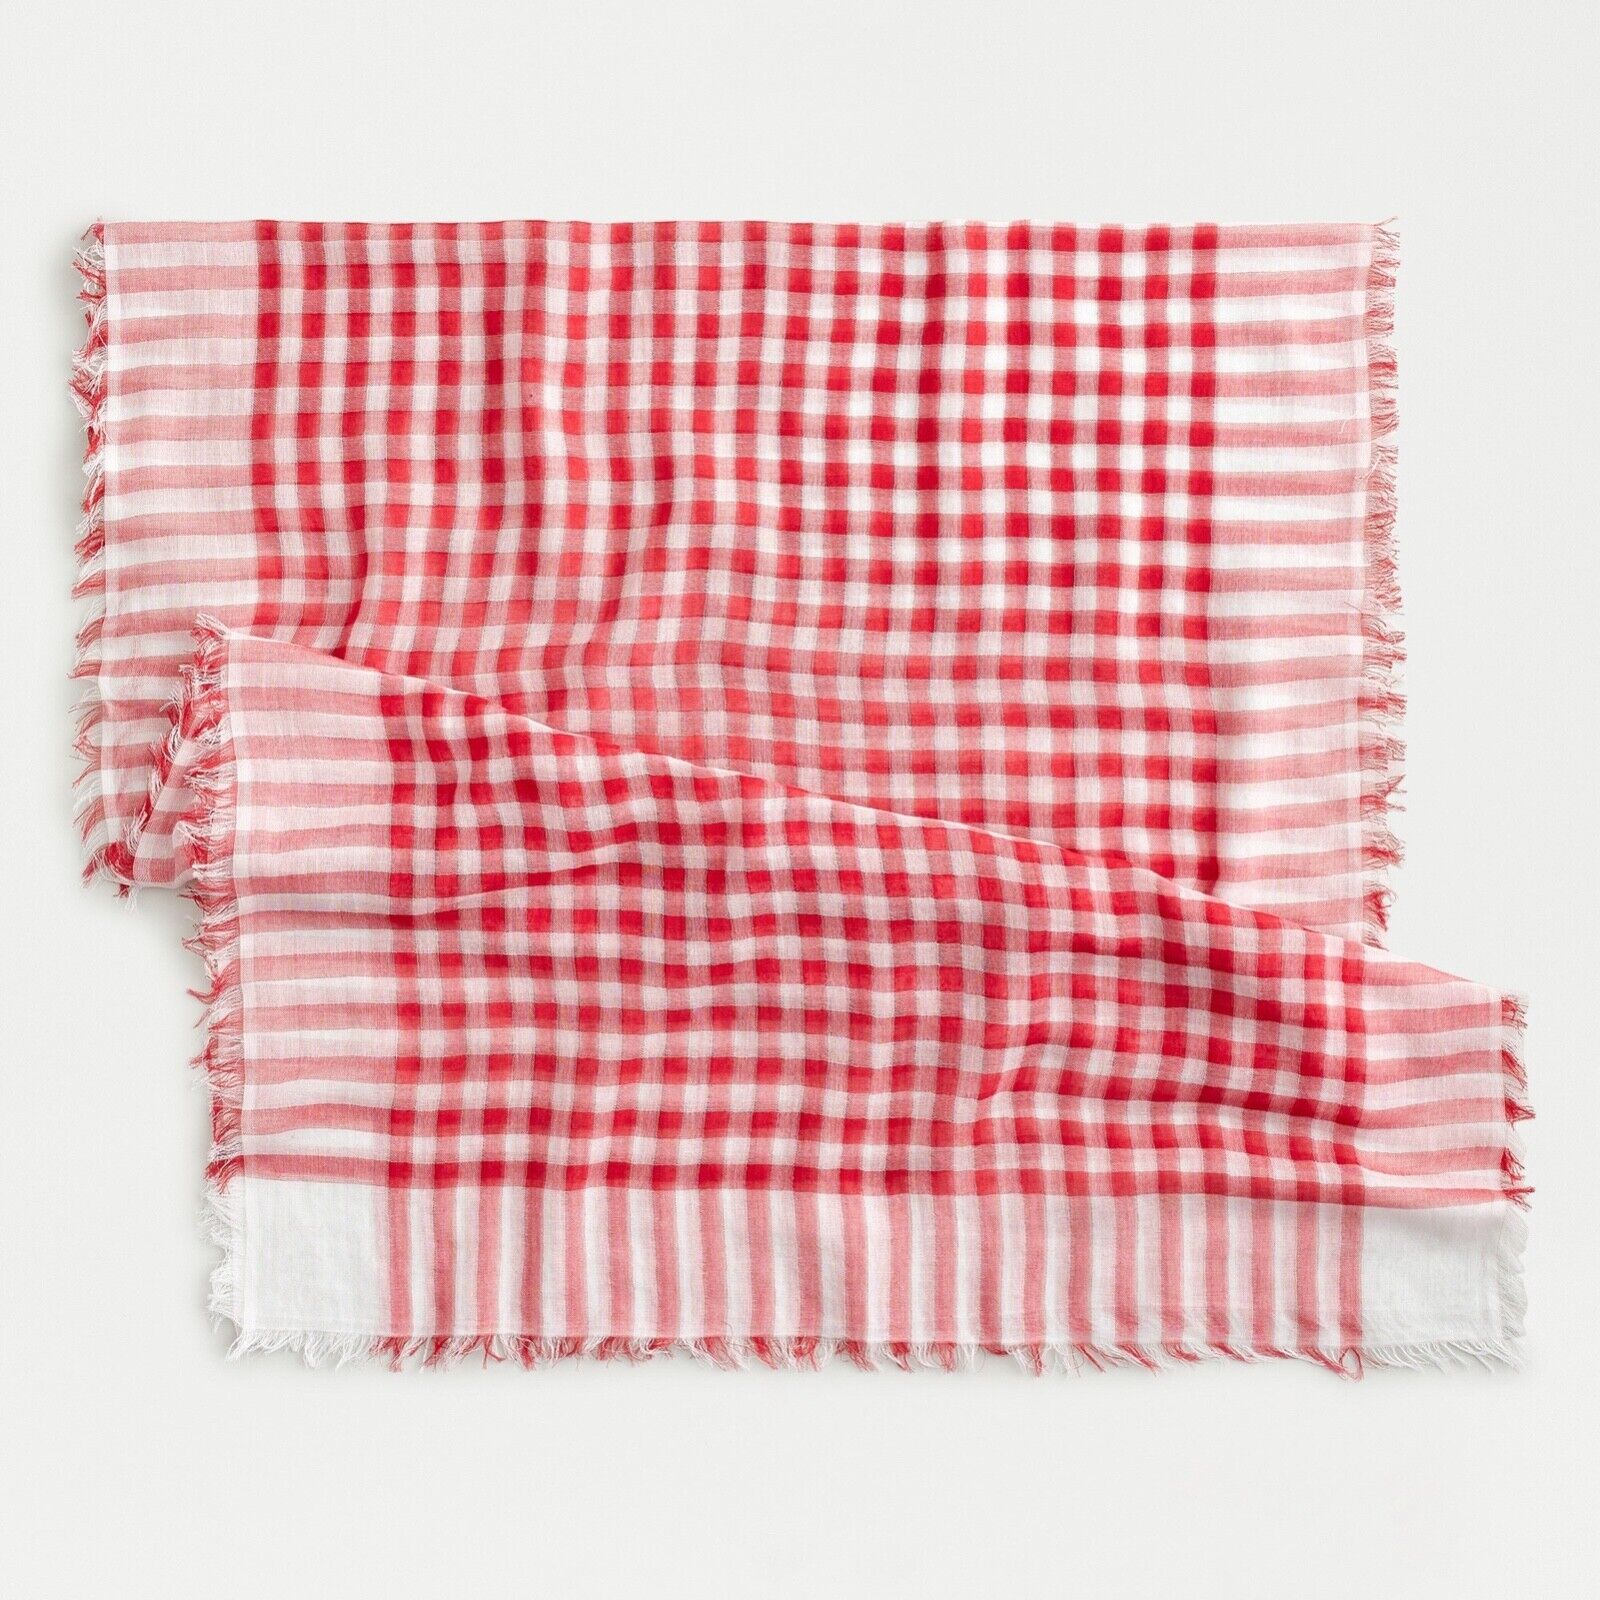 J.Crew Organic Cotton Scarf in Gingham | White Red | $39.50 | eBay US